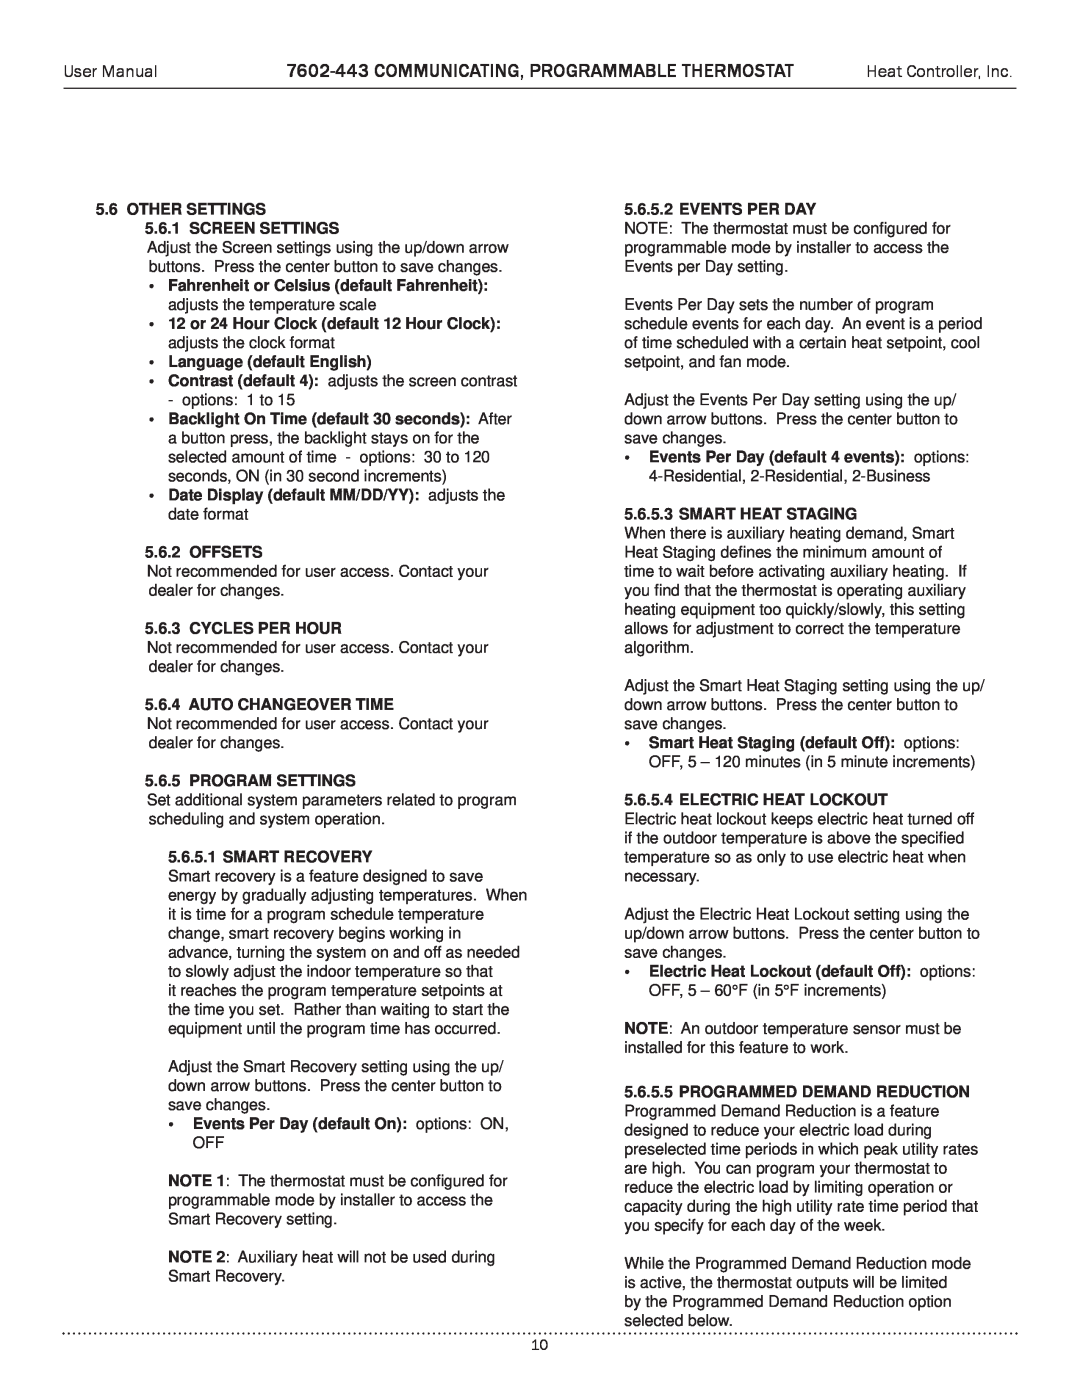 Heat Controller user manual 7602-443COMMUNICATING, PROGRAMMABLE THERMOSTAT, Heat Controller, Inc 